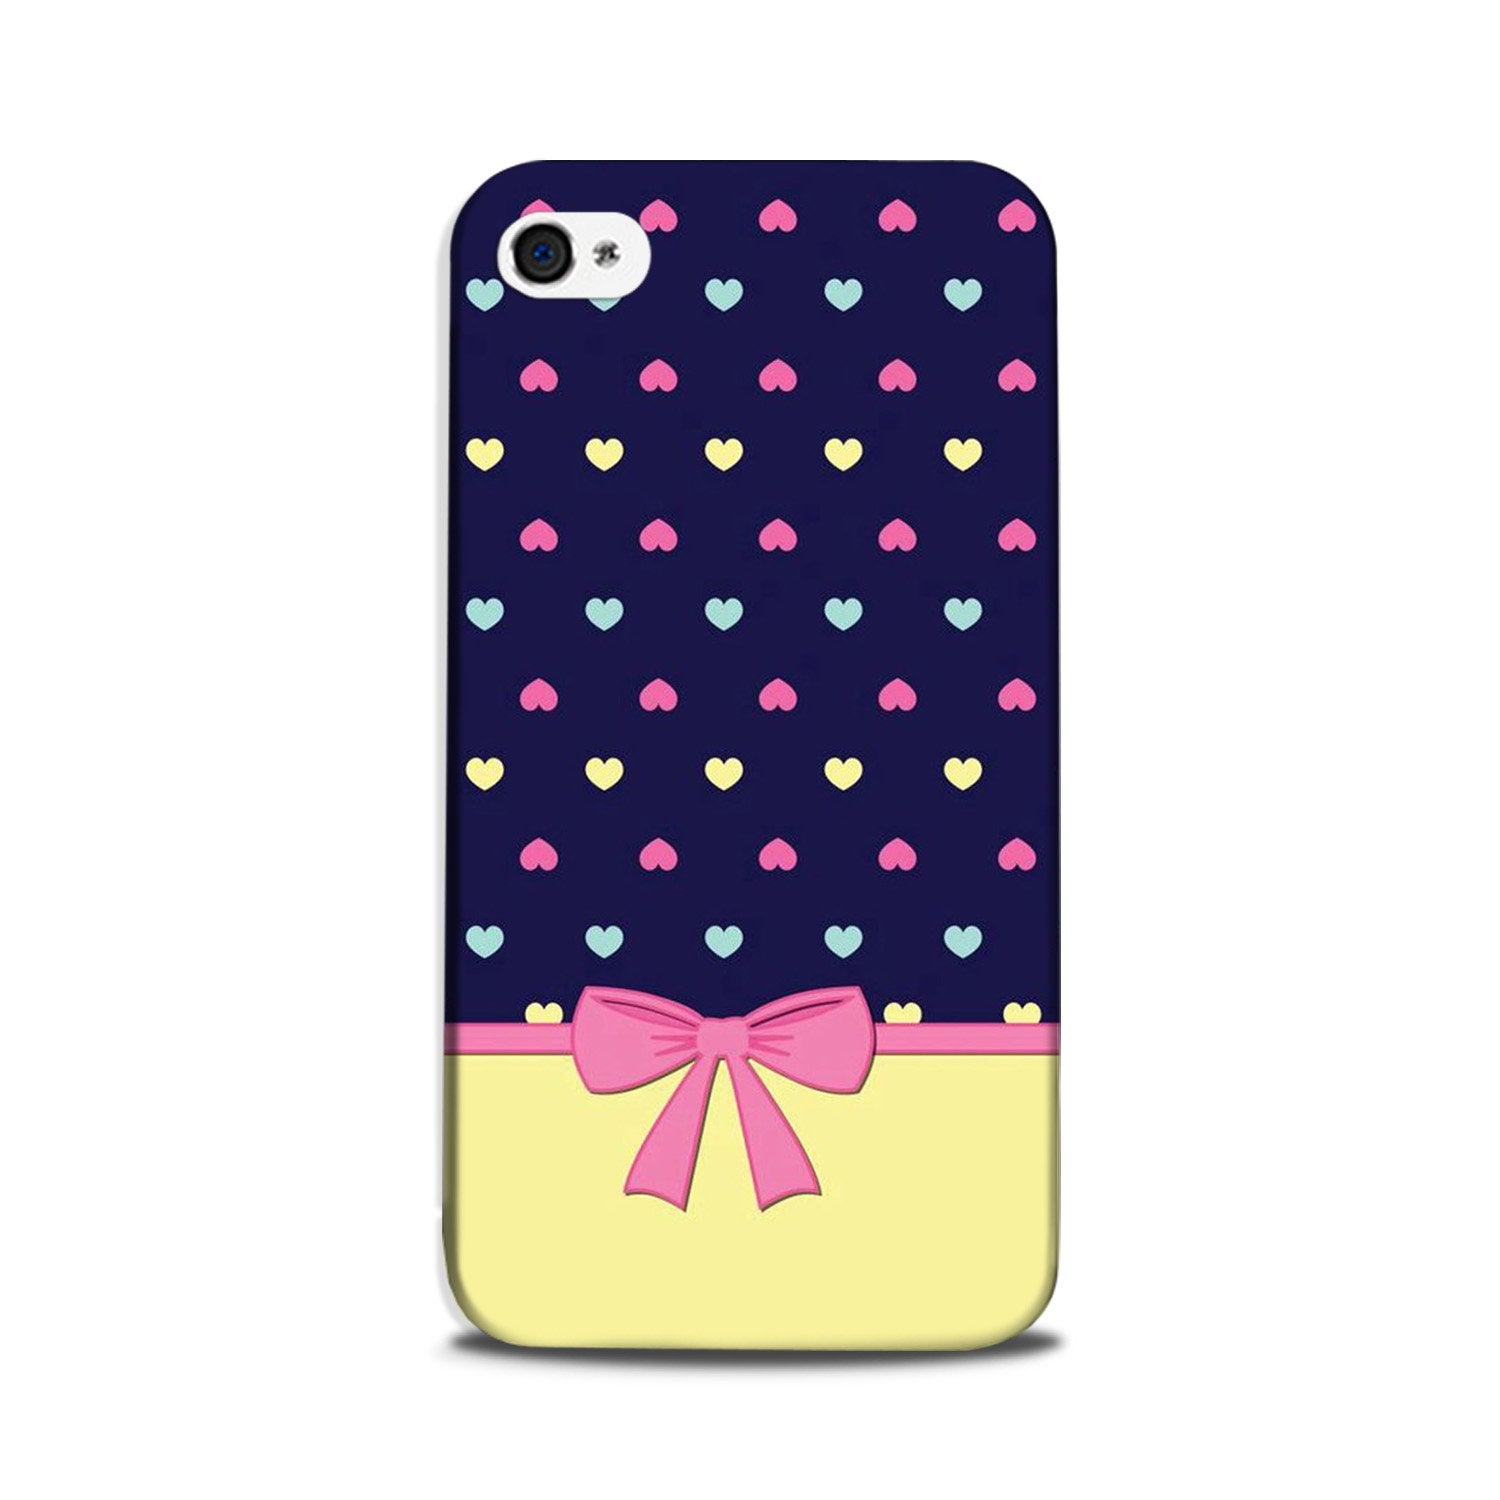 Gift Wrap5 Case for iPhone 5/ 5s